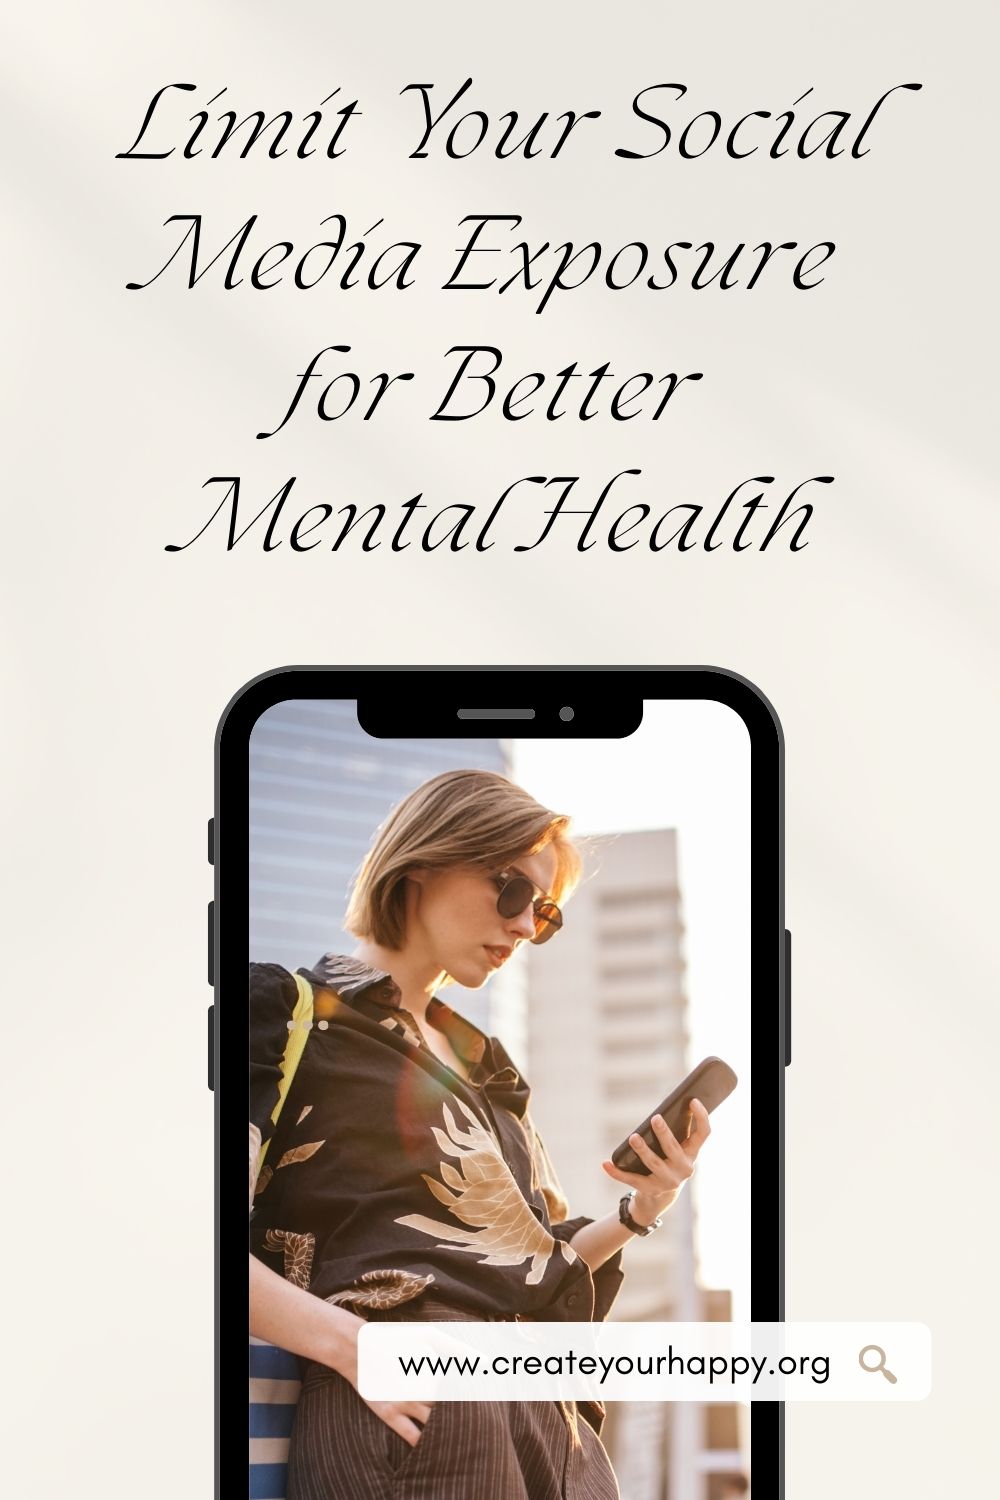 Limit Your Social Media Exposure for Better Mental Health